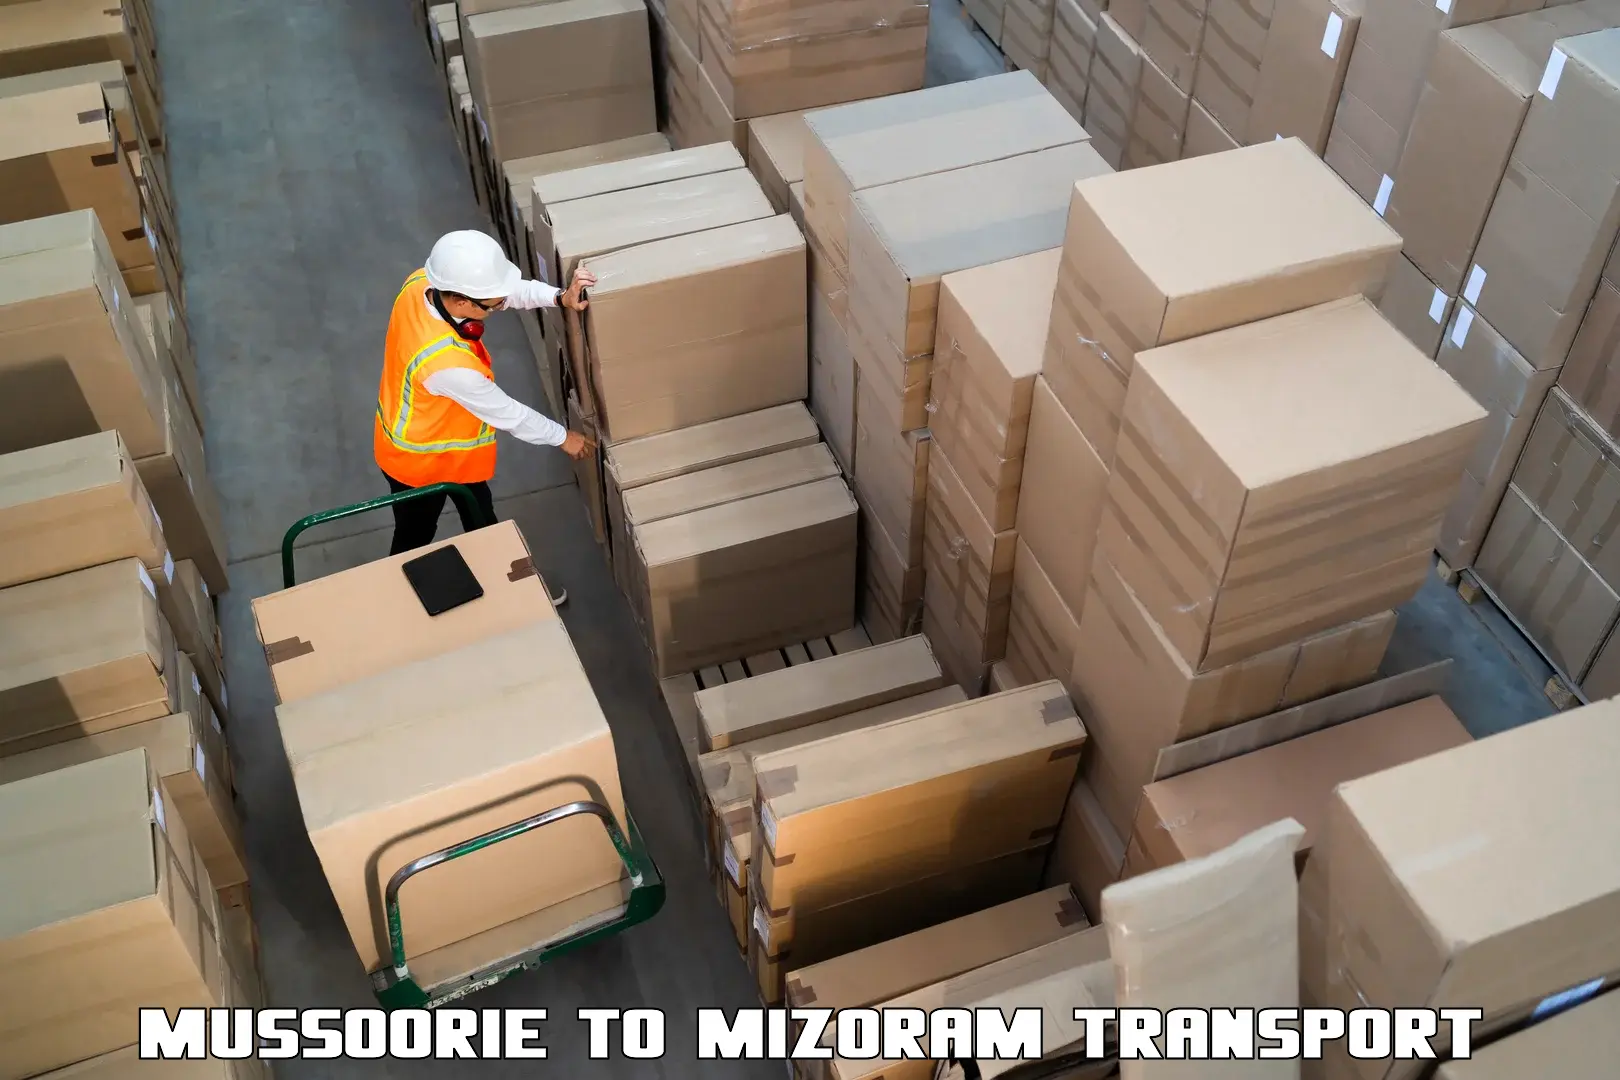 Daily parcel service transport Mussoorie to Aizawl